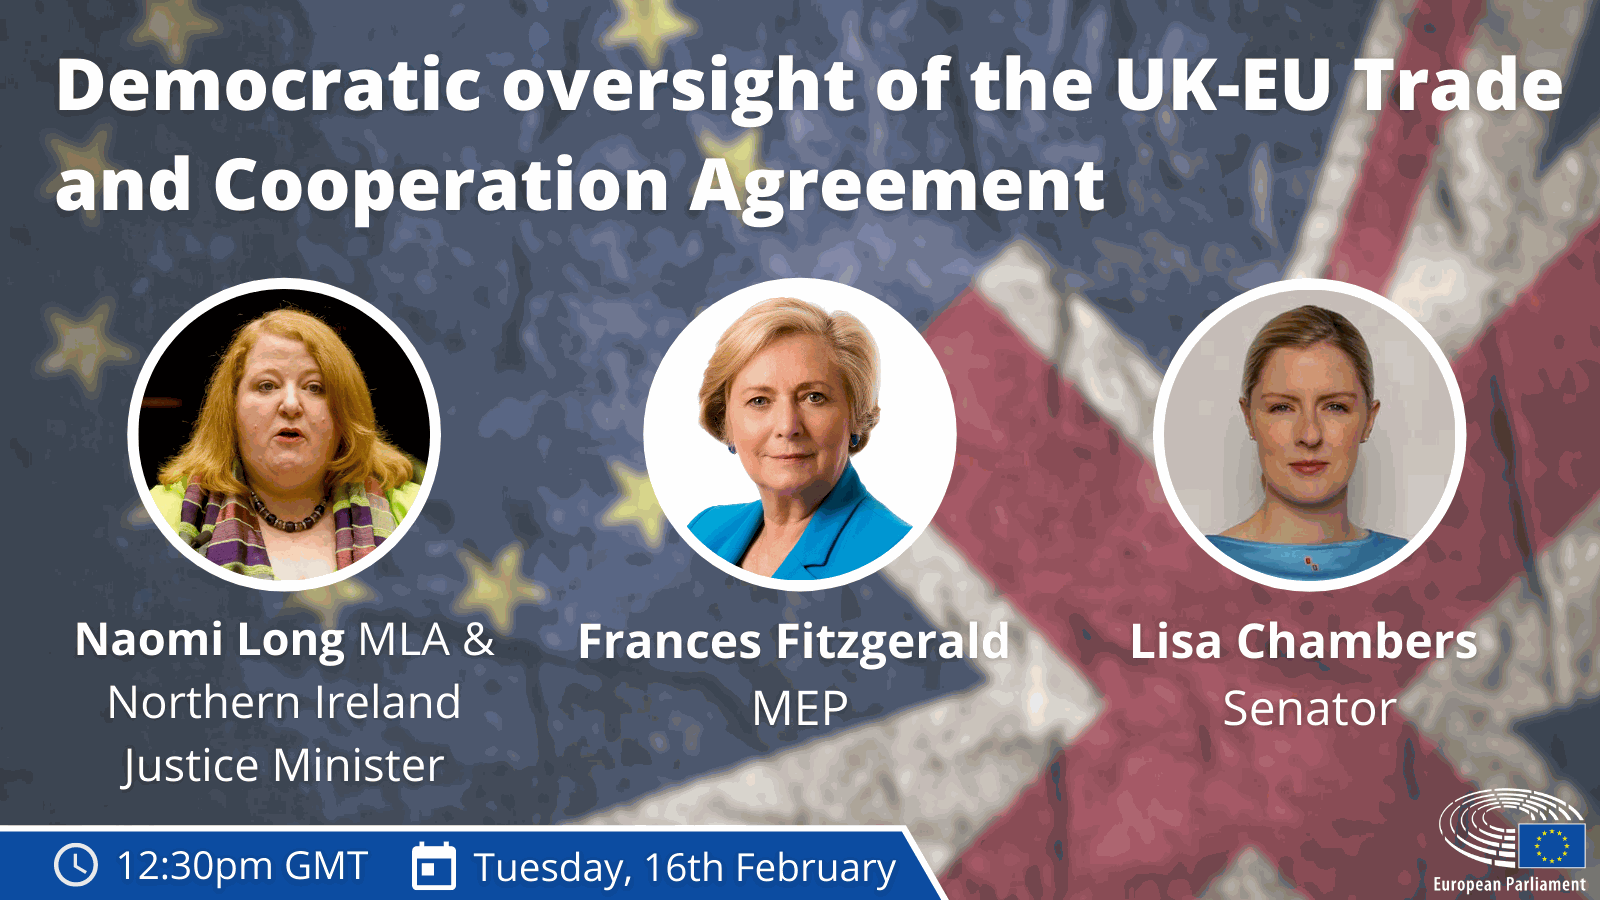 Webinar: Democratic oversight of the UK-EU Trade and Cooperation Agreement